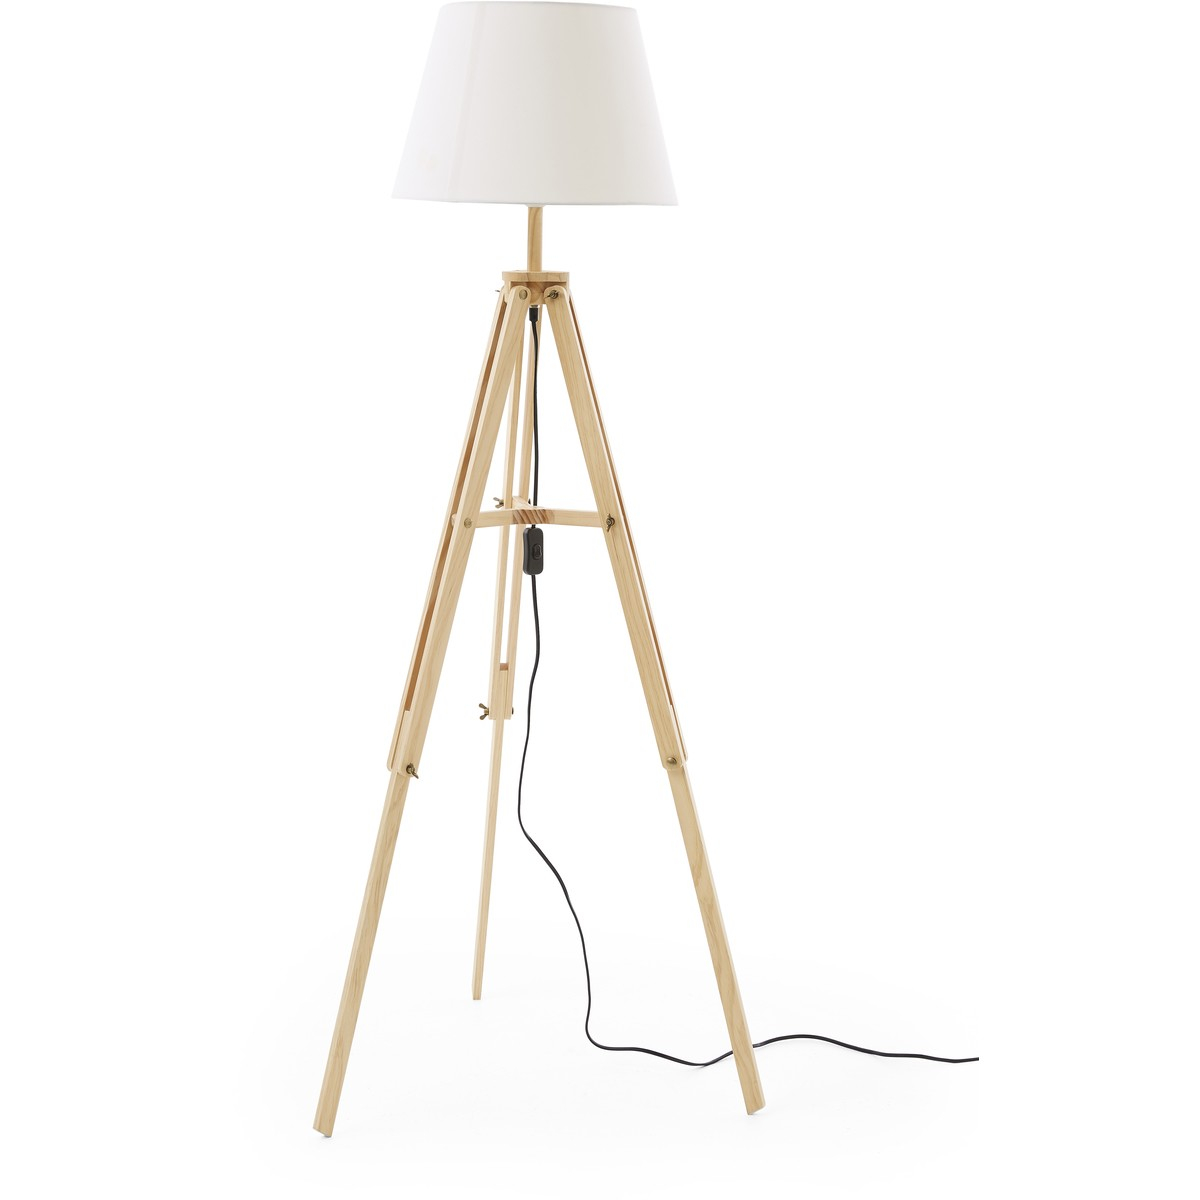 Big W Floor Lamps Floor Perfect throughout sizing 1200 X 1200